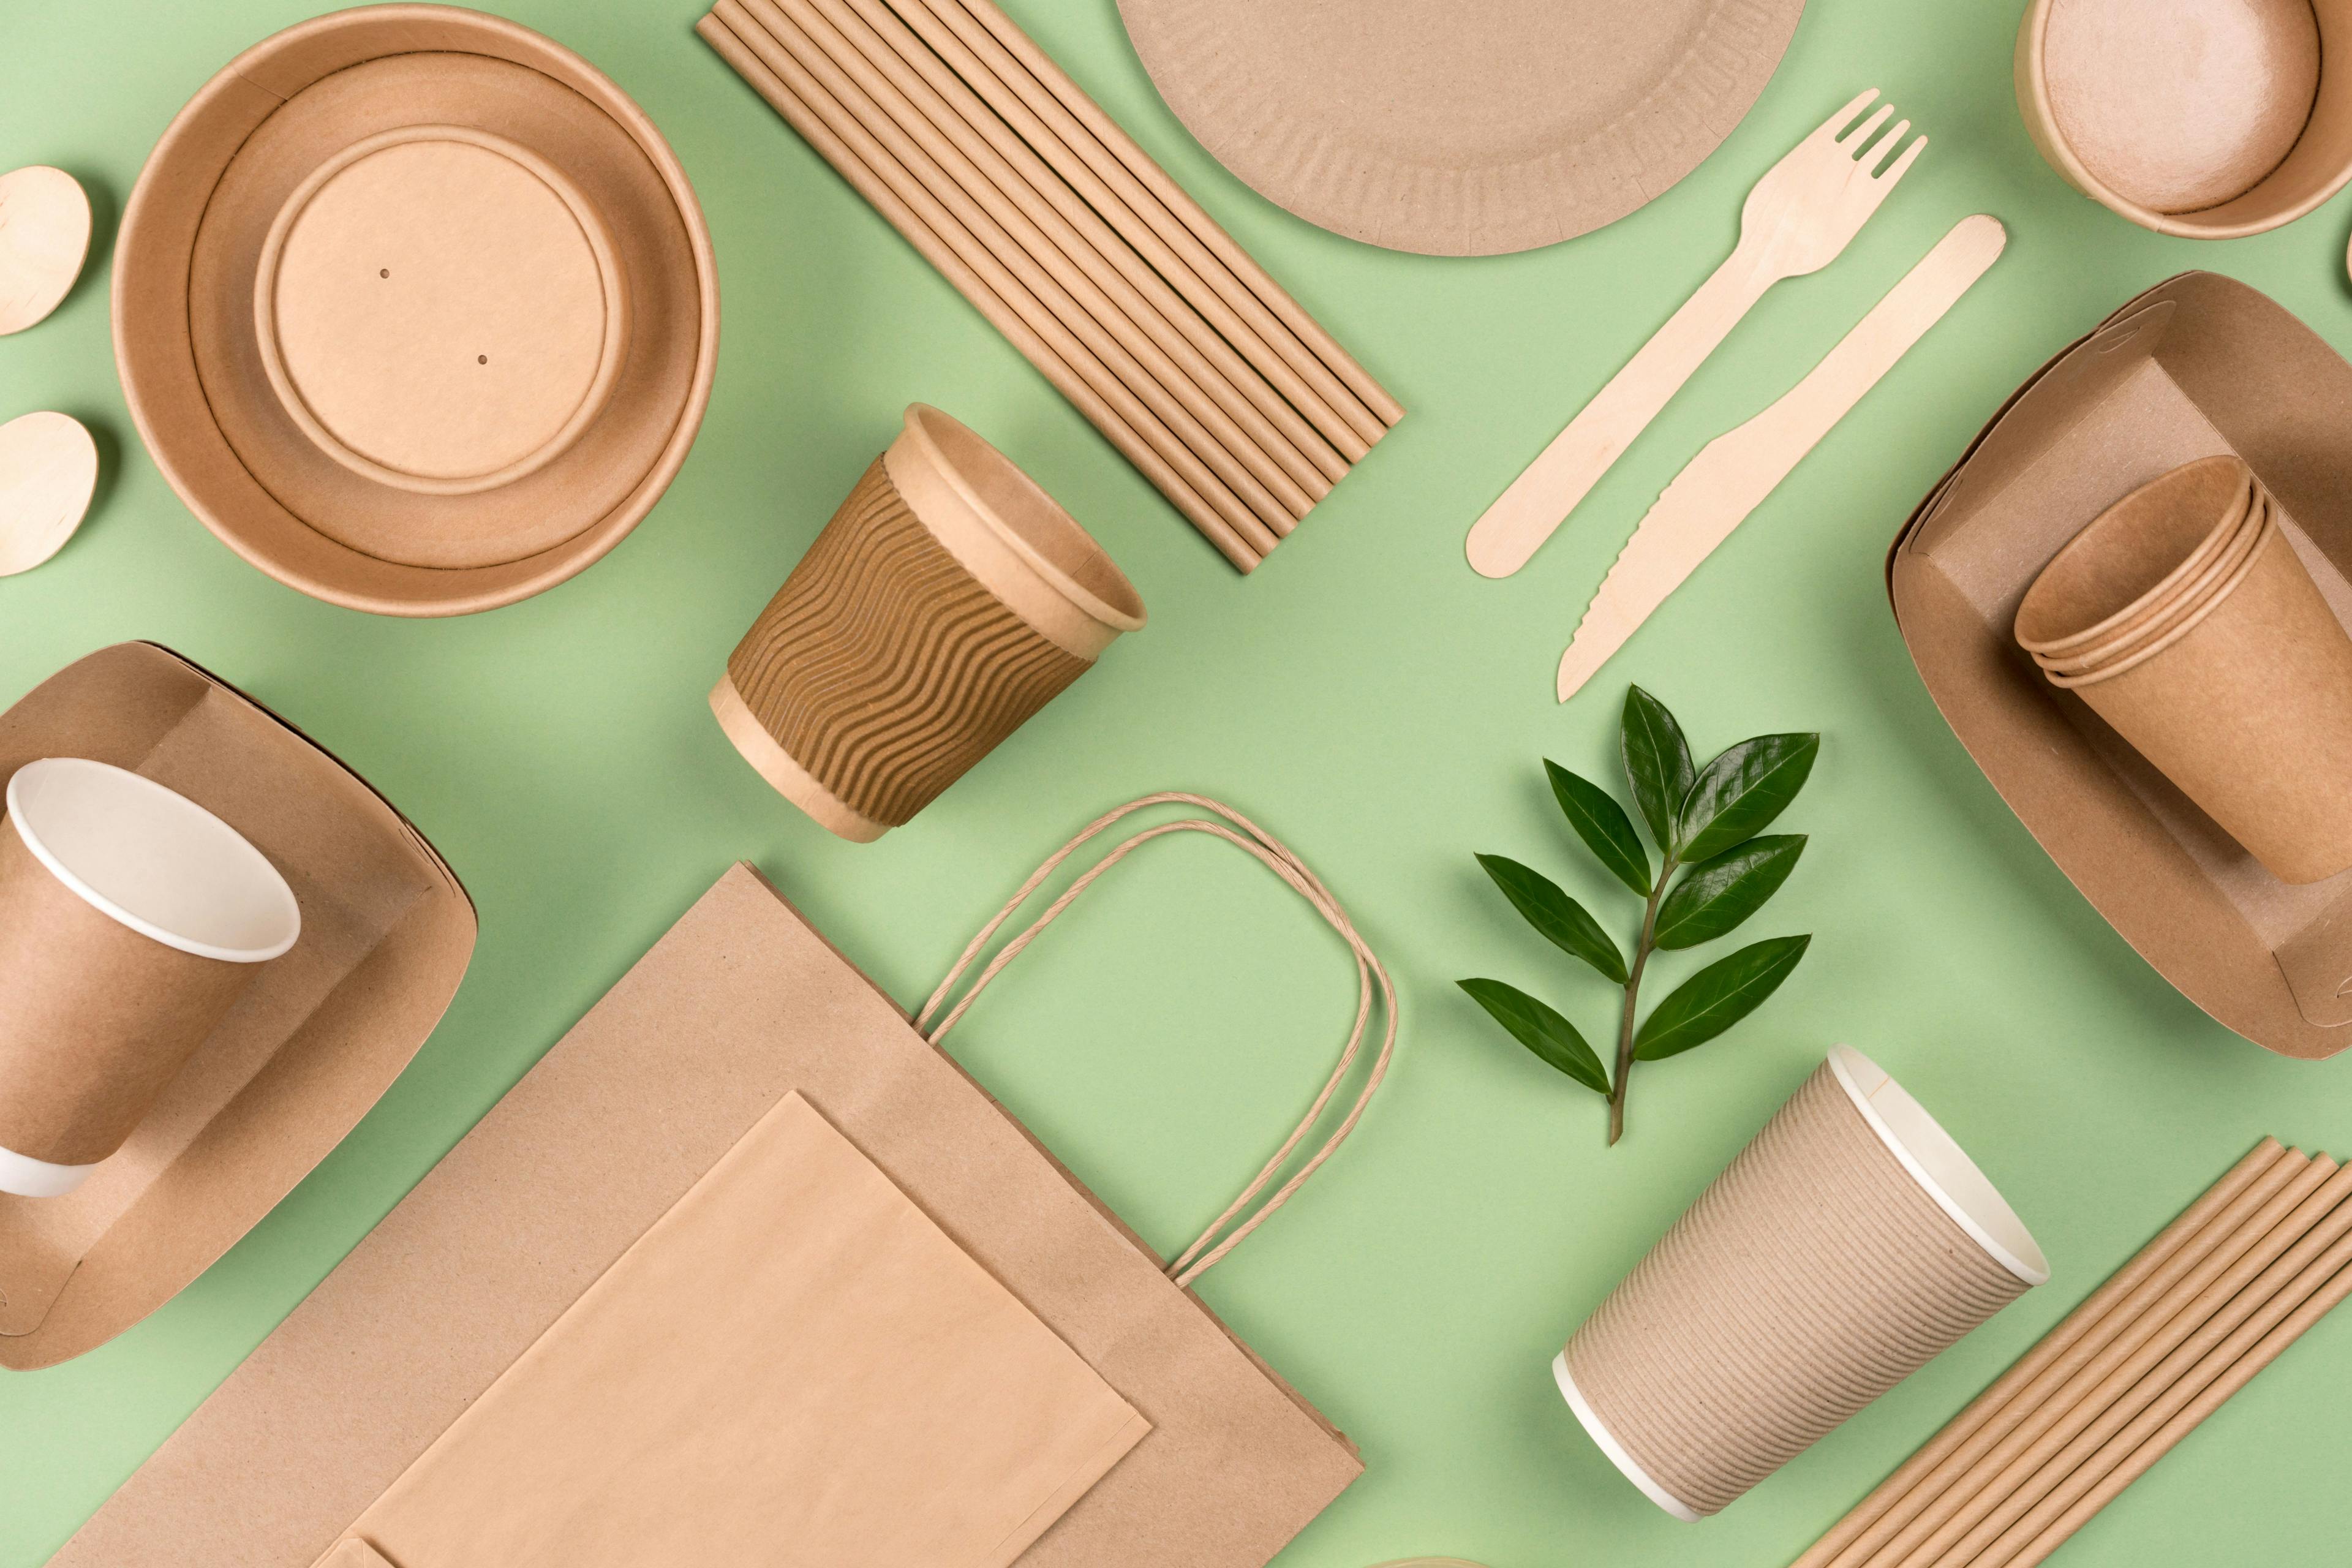 Eco-friendly tableware - kraft paper food packaging on light green background. Street food paper packaging, recyclable paperware, zero waste packaging concept. Flat lay | Image Credit: © Iryna Mylinska - stock.adobe.com